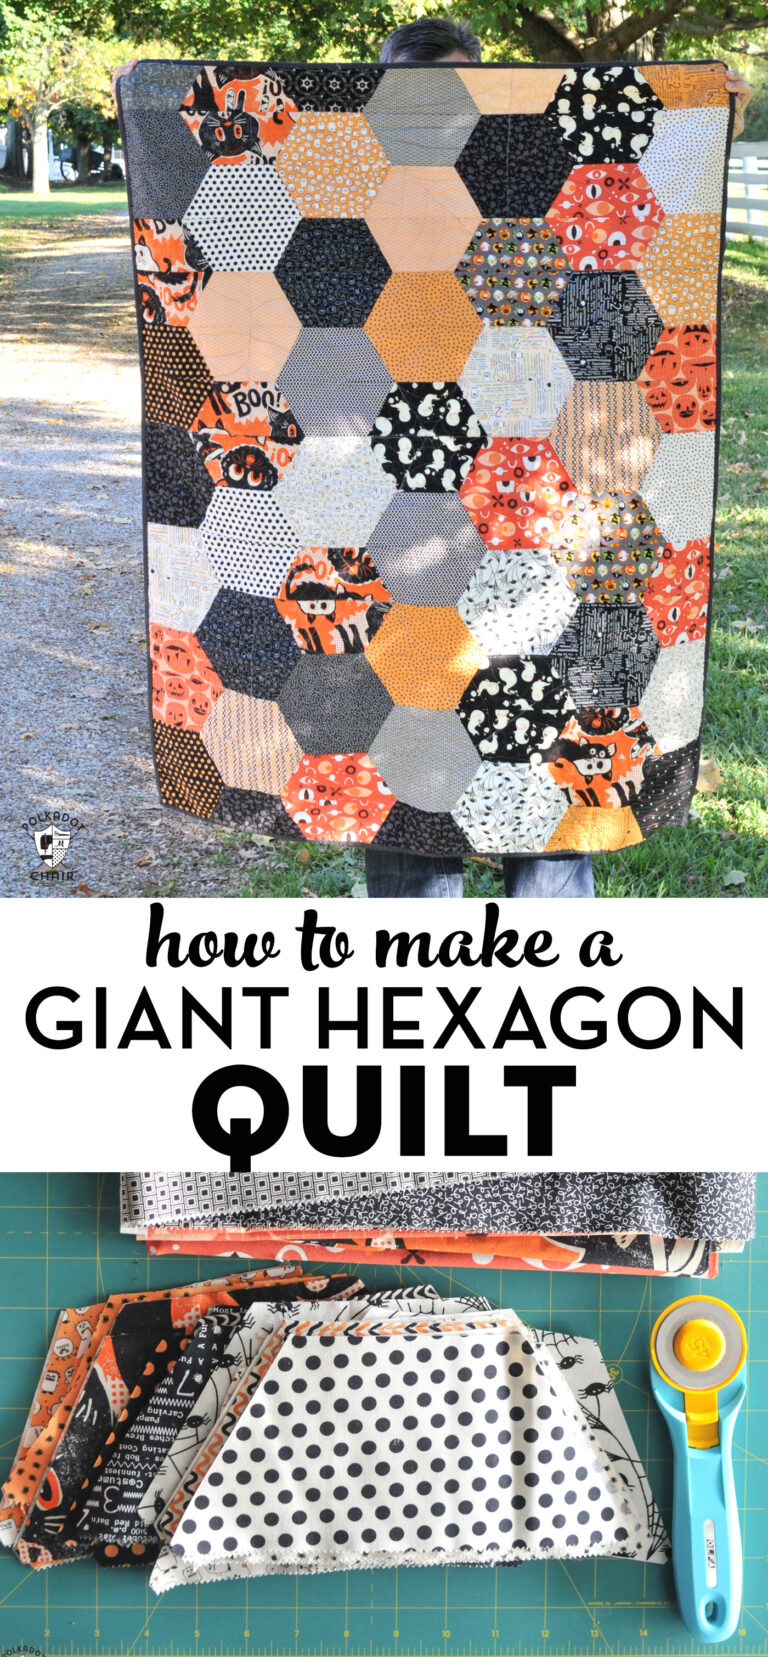 Large Hexagon Quilt Pattern and Tutorial | Polka Dot Chair